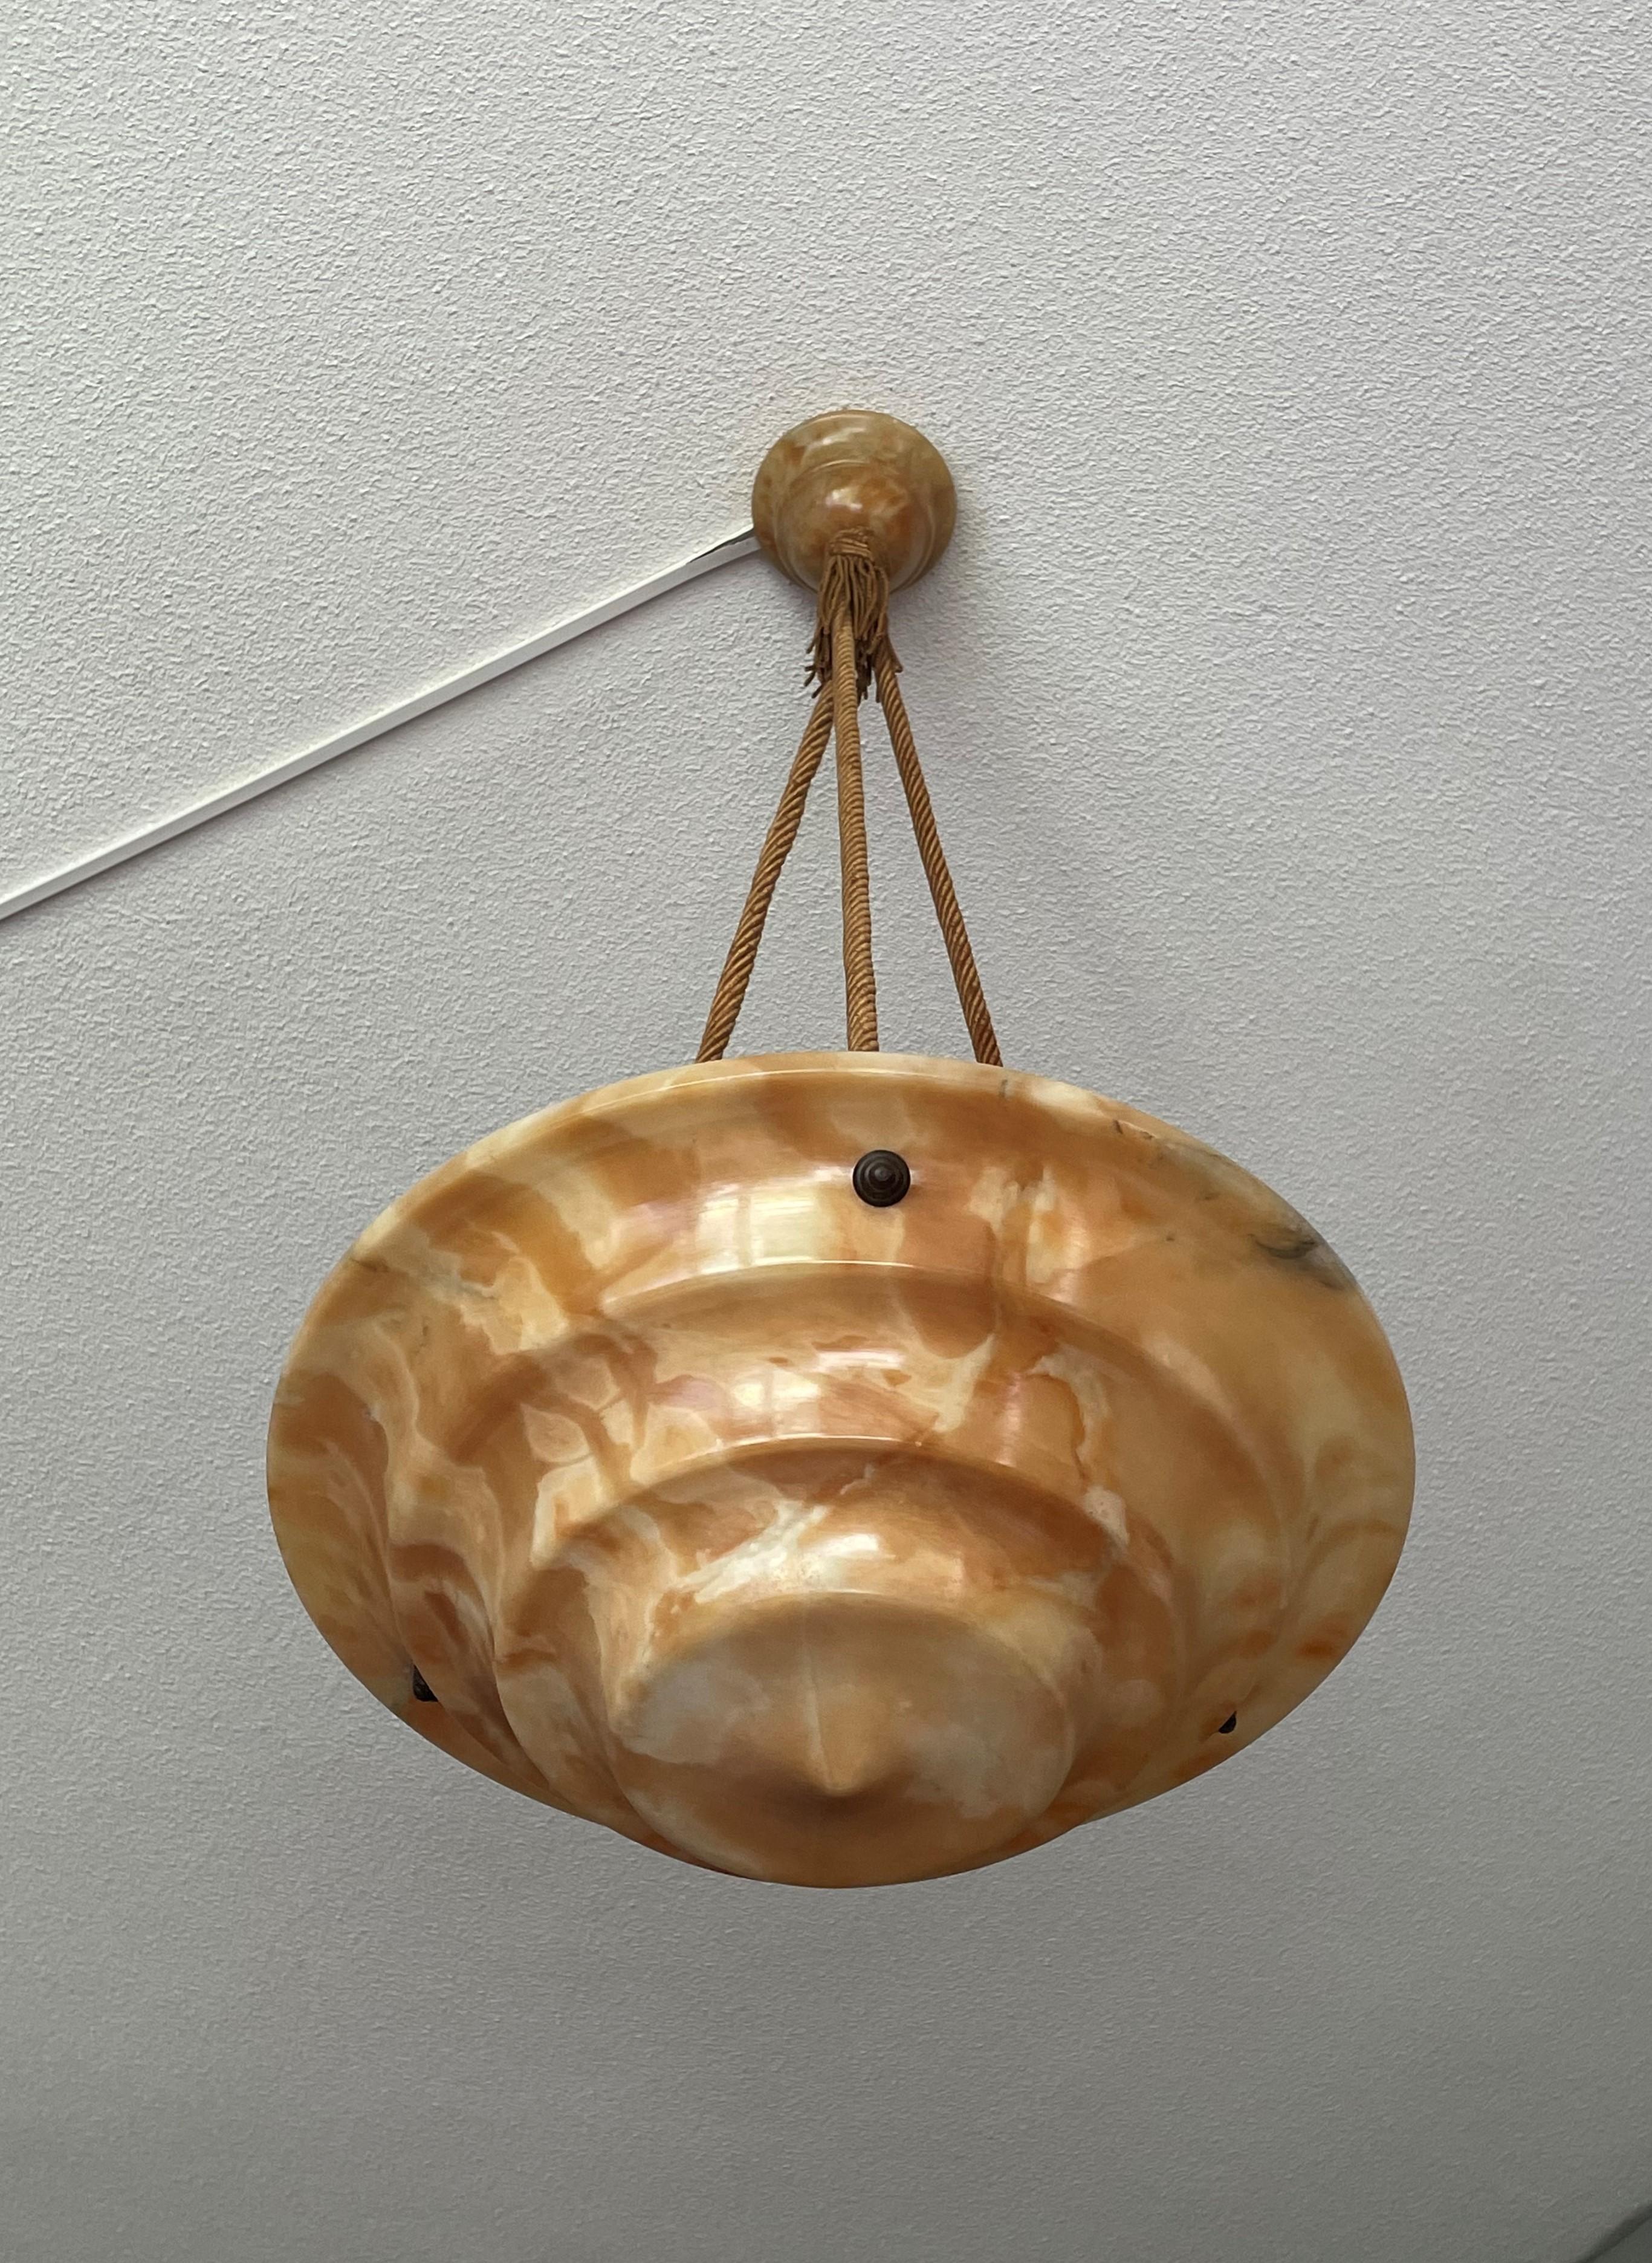 Stunning, amber color alabaster chandelier with unique stripe patterns.

This practical size and superb condition Art Deco pendant could not be more original. Apart from the wiring, every piece, from the alabaster canopy down to the remarkable Art